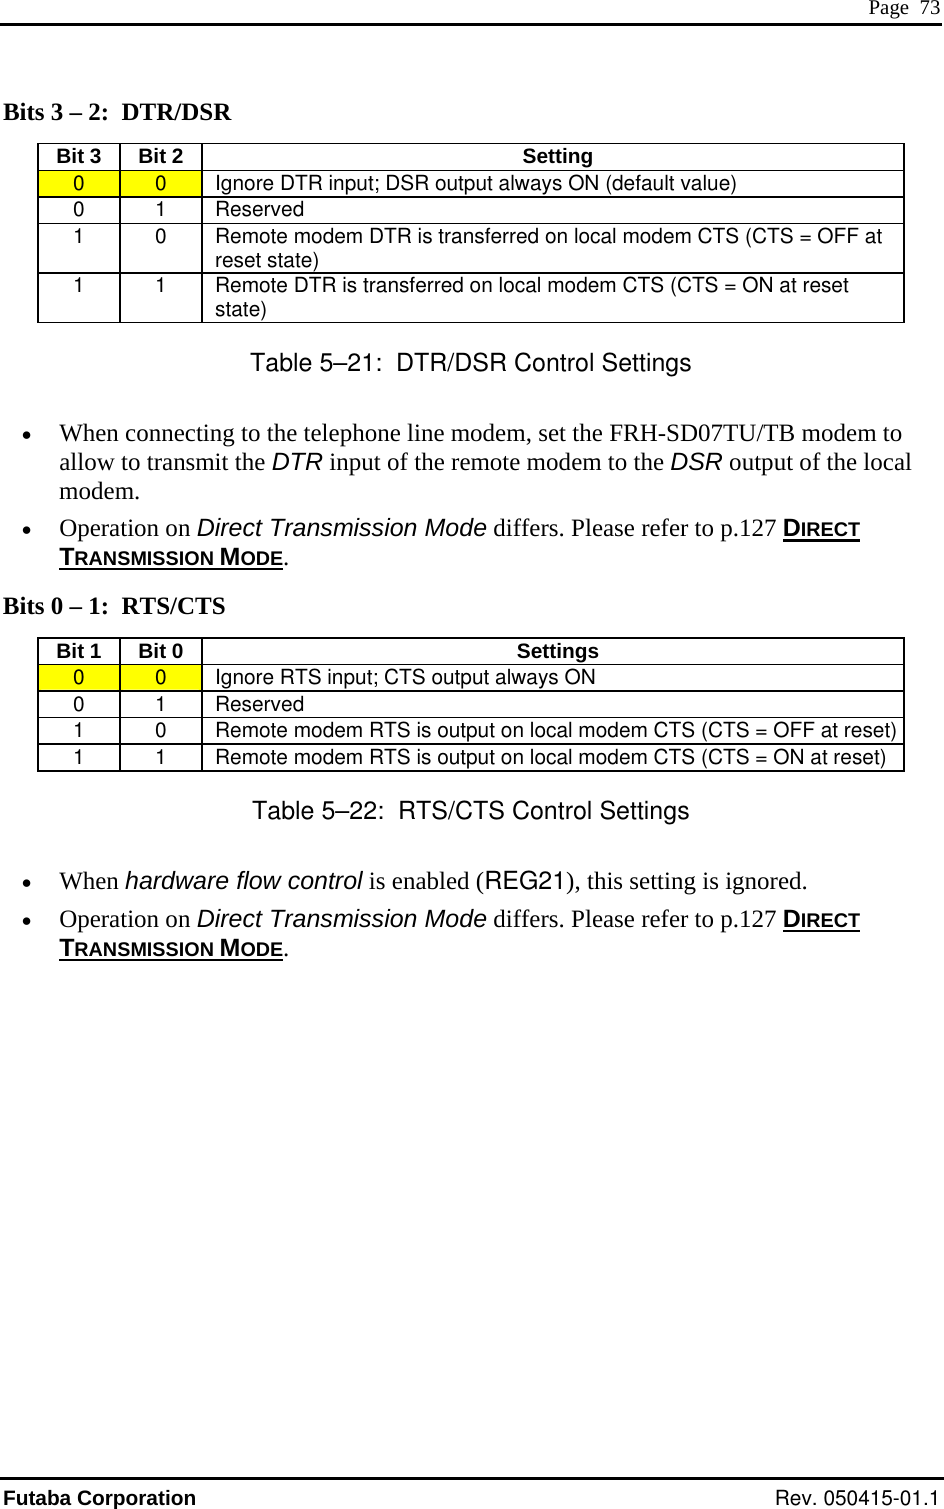  Page  73 Bits 3 – 2:  DTR/DSR Setting Bit 3  Bit 2   0  0   Ignore DTR input; DSR output always ON (default value) 0 1  Reserved 1  0   Remote modem DTR is transferred on local modem CTS (CTS = OFF at reset state) 1  1  al modem CTS (CTS = ON at reset state)  Remote DTR is transferred on locTable 5–21:  DTR/DSR Control Settings  rs. Please refer to p.127 DIRECT •  When connecting to the telephone line modem, set the FRH-SD07TU/TB modem toallow to transmit the DTR input of the remote modem to the DSR output of the local modem. •  Operation on Direct Transmission Mode diffeTRANSMISSION MODE. Bits 0 – 1:  RTS/CTS Bit 1  Bit 0    Settings 0  0   Ignore RTS input; CTS output always ON 0 1  Reserved 1  0   Remote modem RTS is output on local modem CTS (CTS = OFF at reset)1  1   Remote modem RTS is output on dem CTS (CTS = ON at reset) local moTable 5–22:  RTS/CTS Control Settings •  When ha wa•  Operation on Drs. Please refer to p.127 DIRECT rd re flow control is enabled (REG21), this setting is ignored. irect Transmission Mode diffeTRANSMISSION MODE. Futaba Corporation Rev. 050415-01.1 